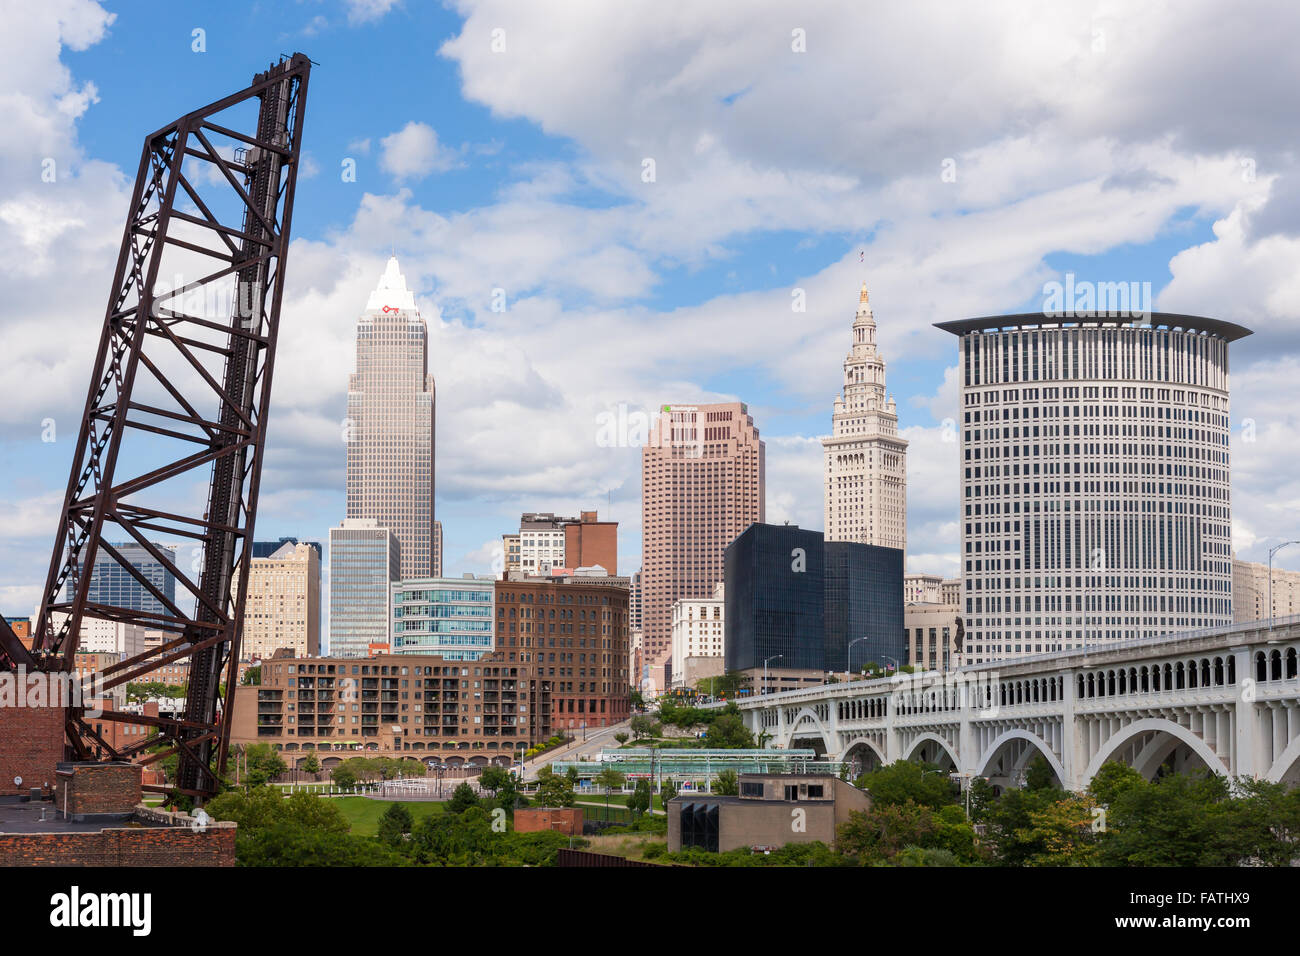 The skyline of Cleveland, Ohio as viewed from the Flats. Stock Photo